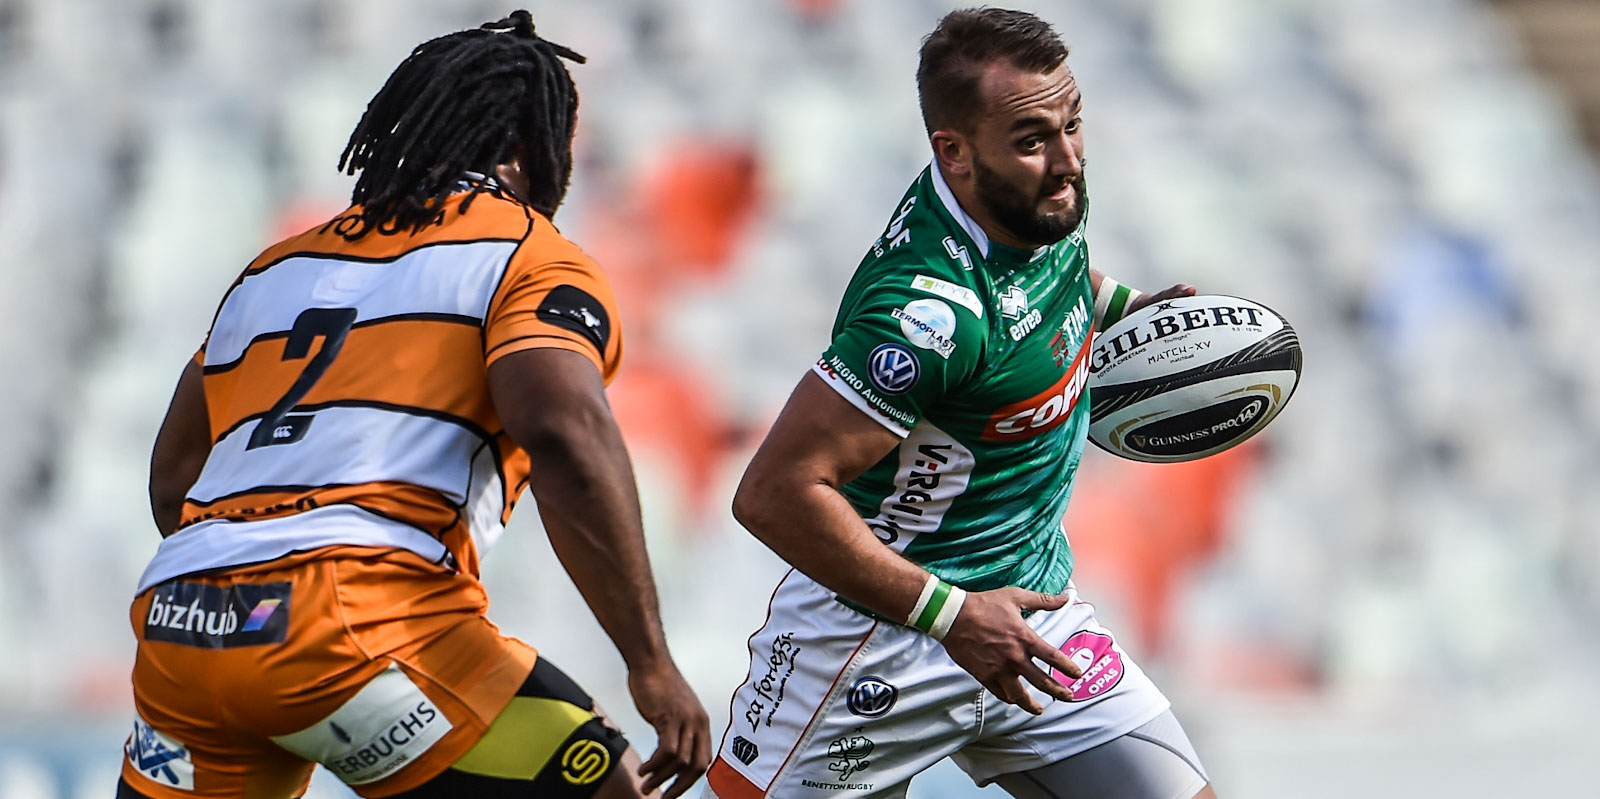 Dewaldt Duvenage in action for Benetton against the Toyota Cheetahs a few years ago.